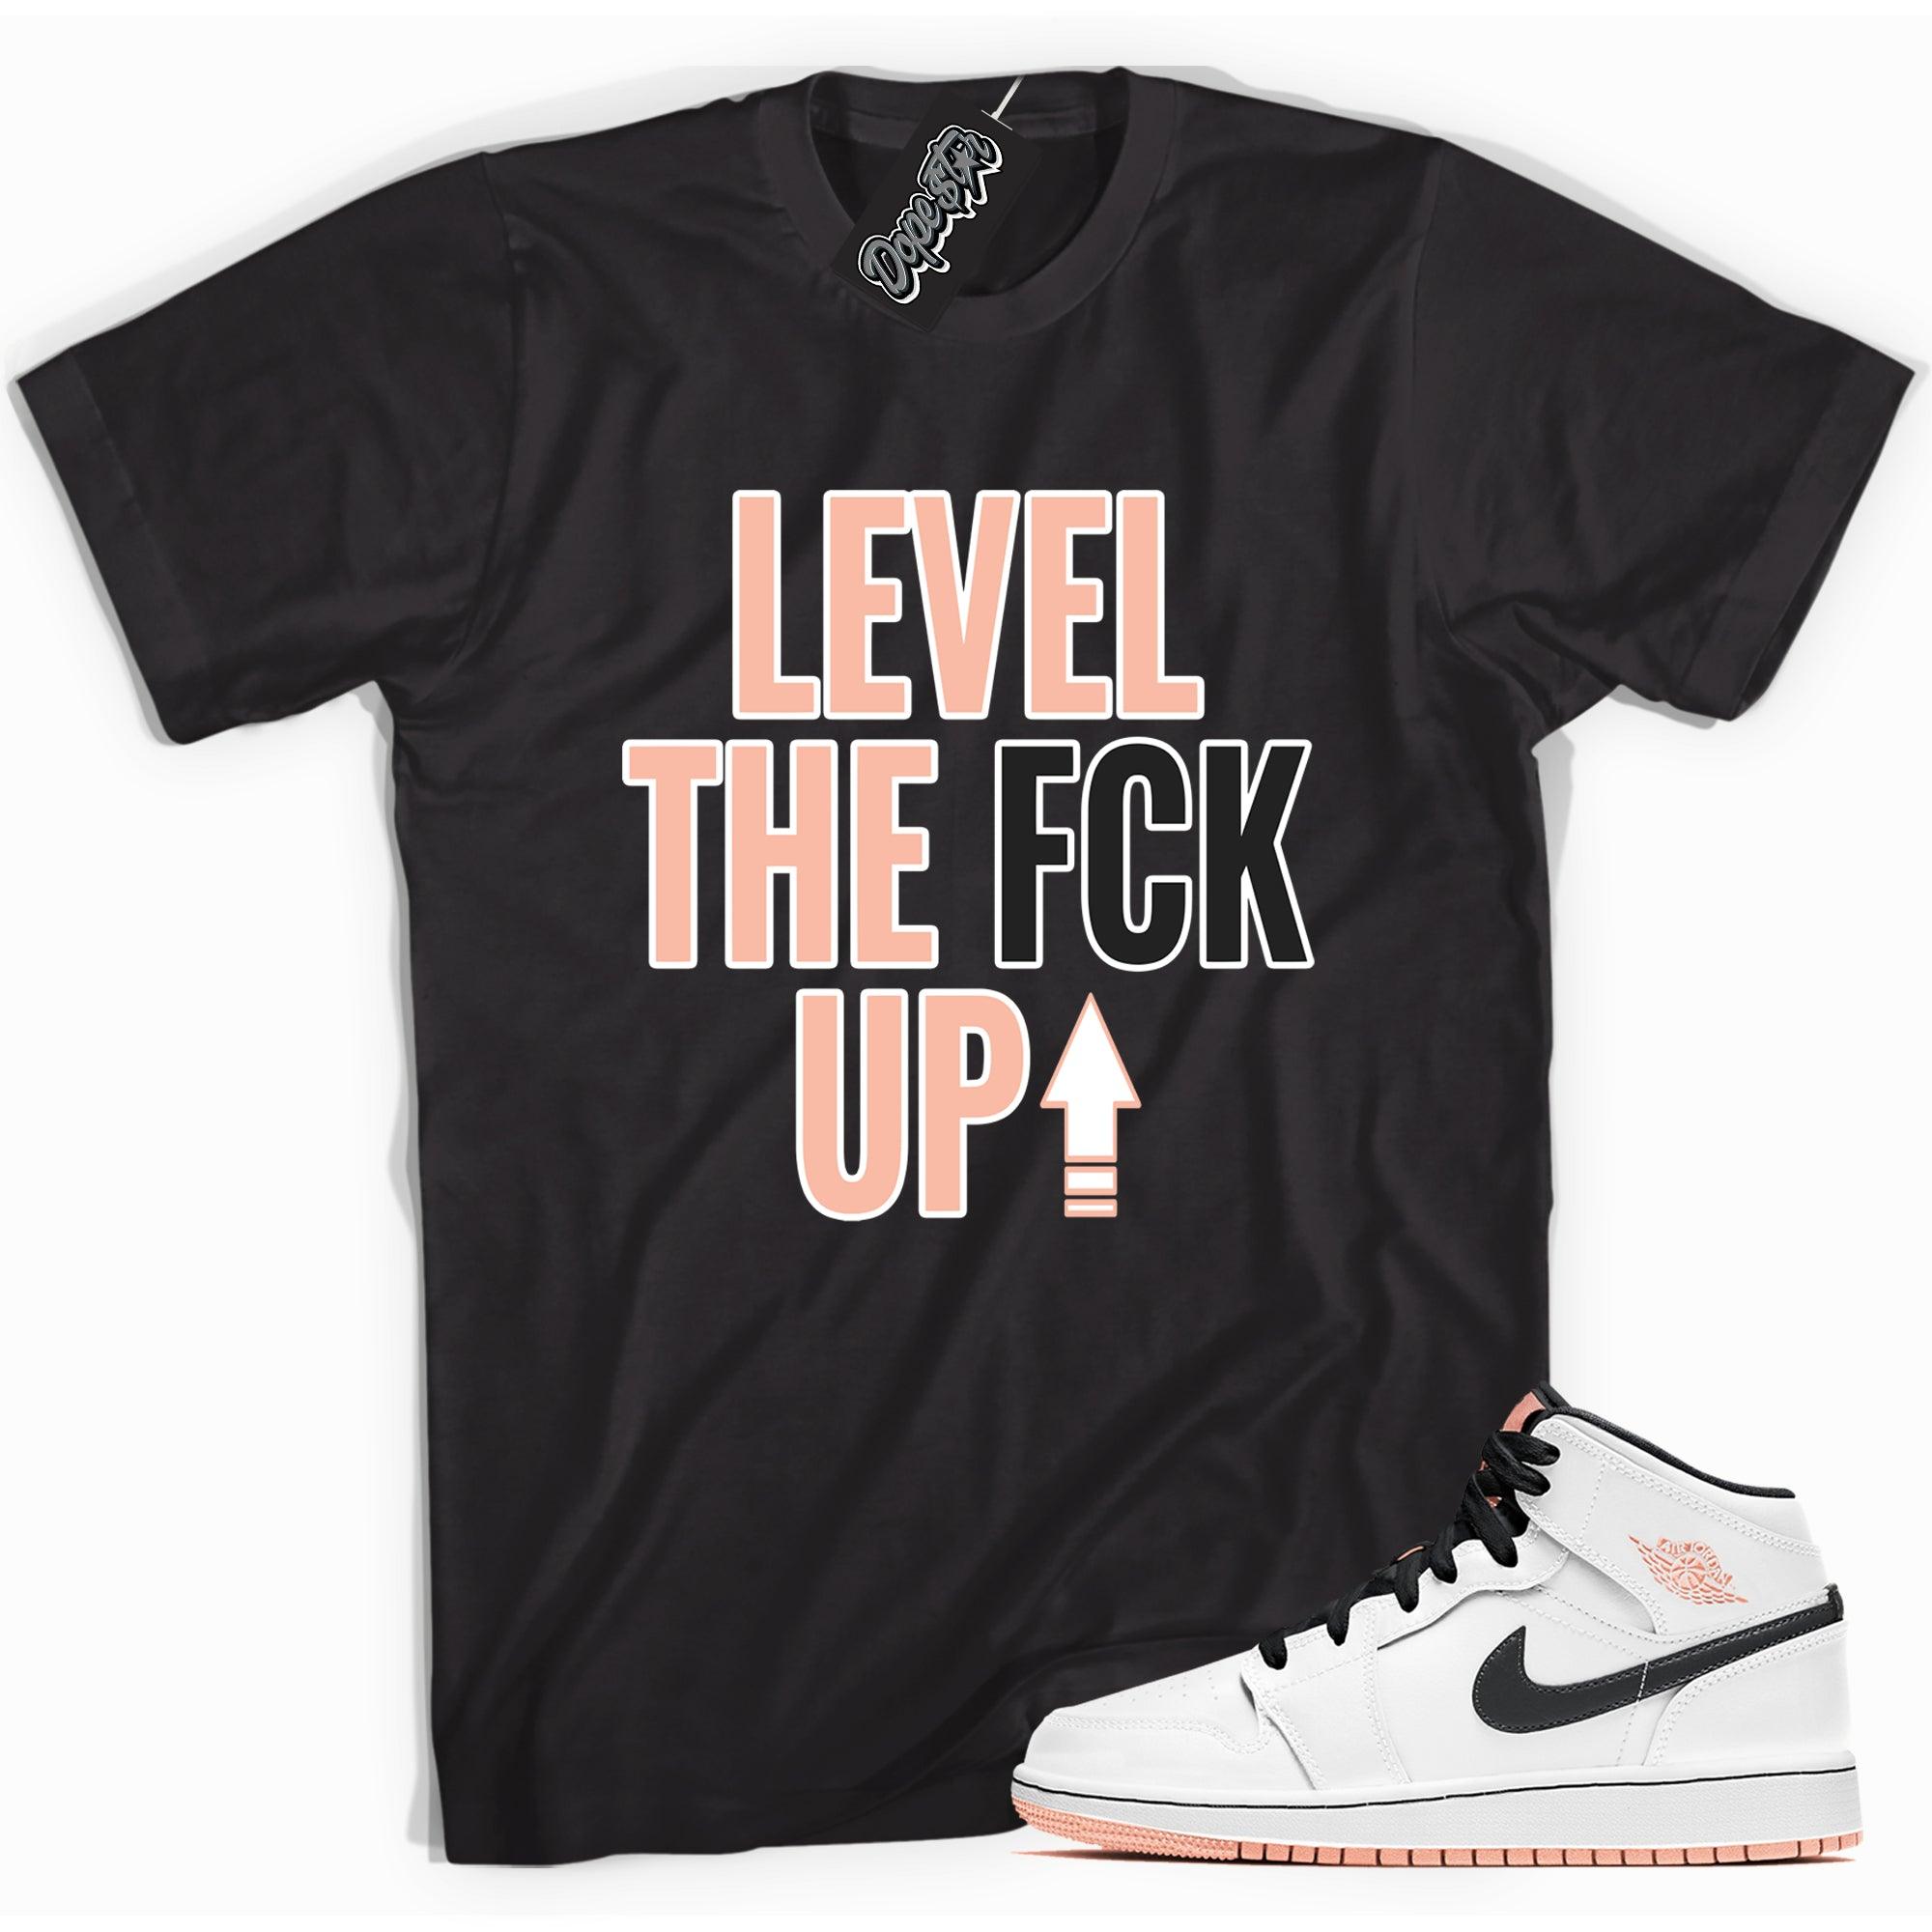 Cool black graphic tee with 'Level Up' print, that perfectly matches Air Jordan 1 Mid Arctic Orange sneakers.